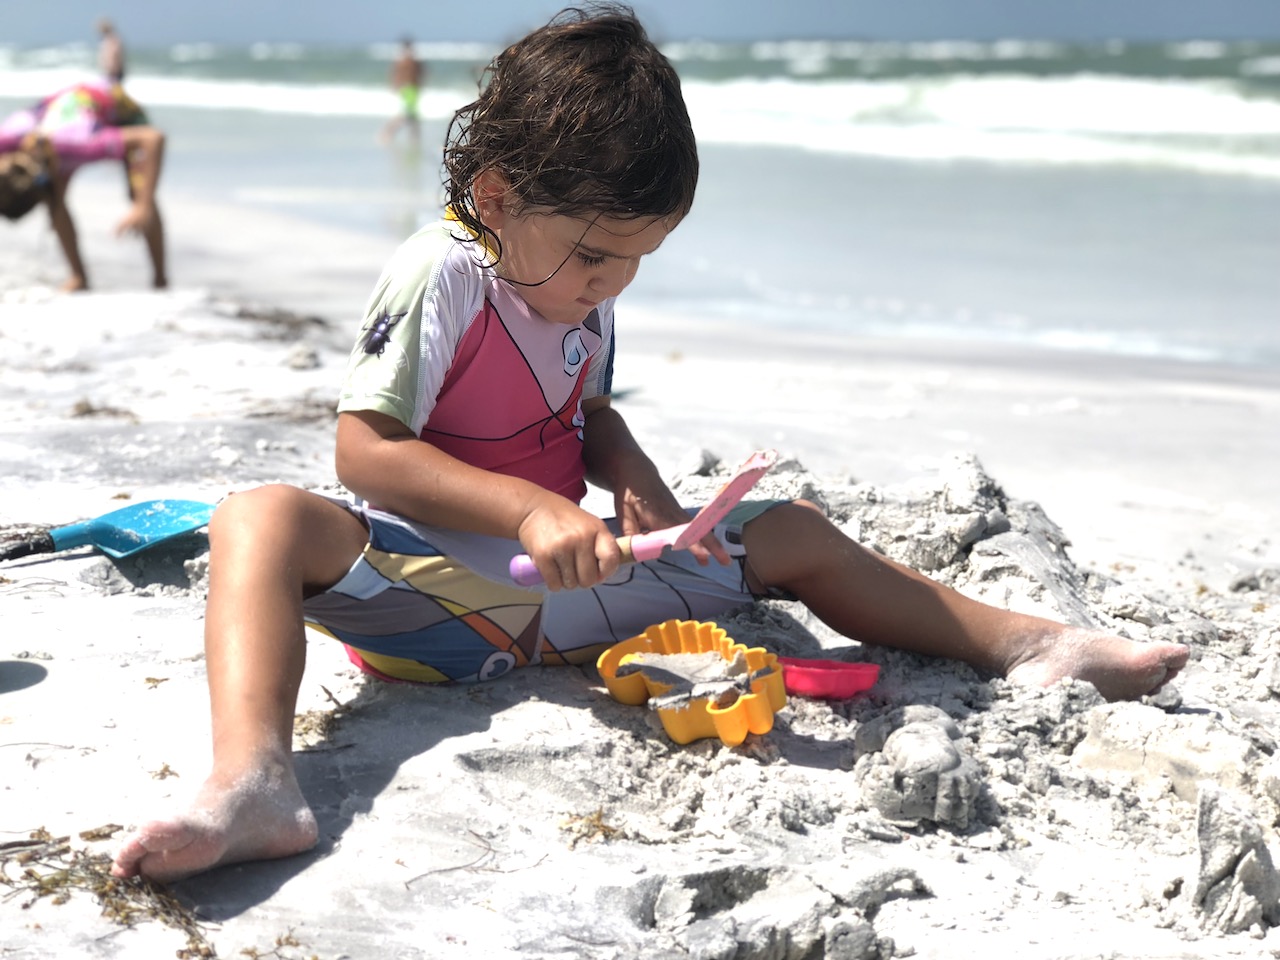 Fort de Soto Beach has very shallow waters, making it the perfect beach to bring little kids